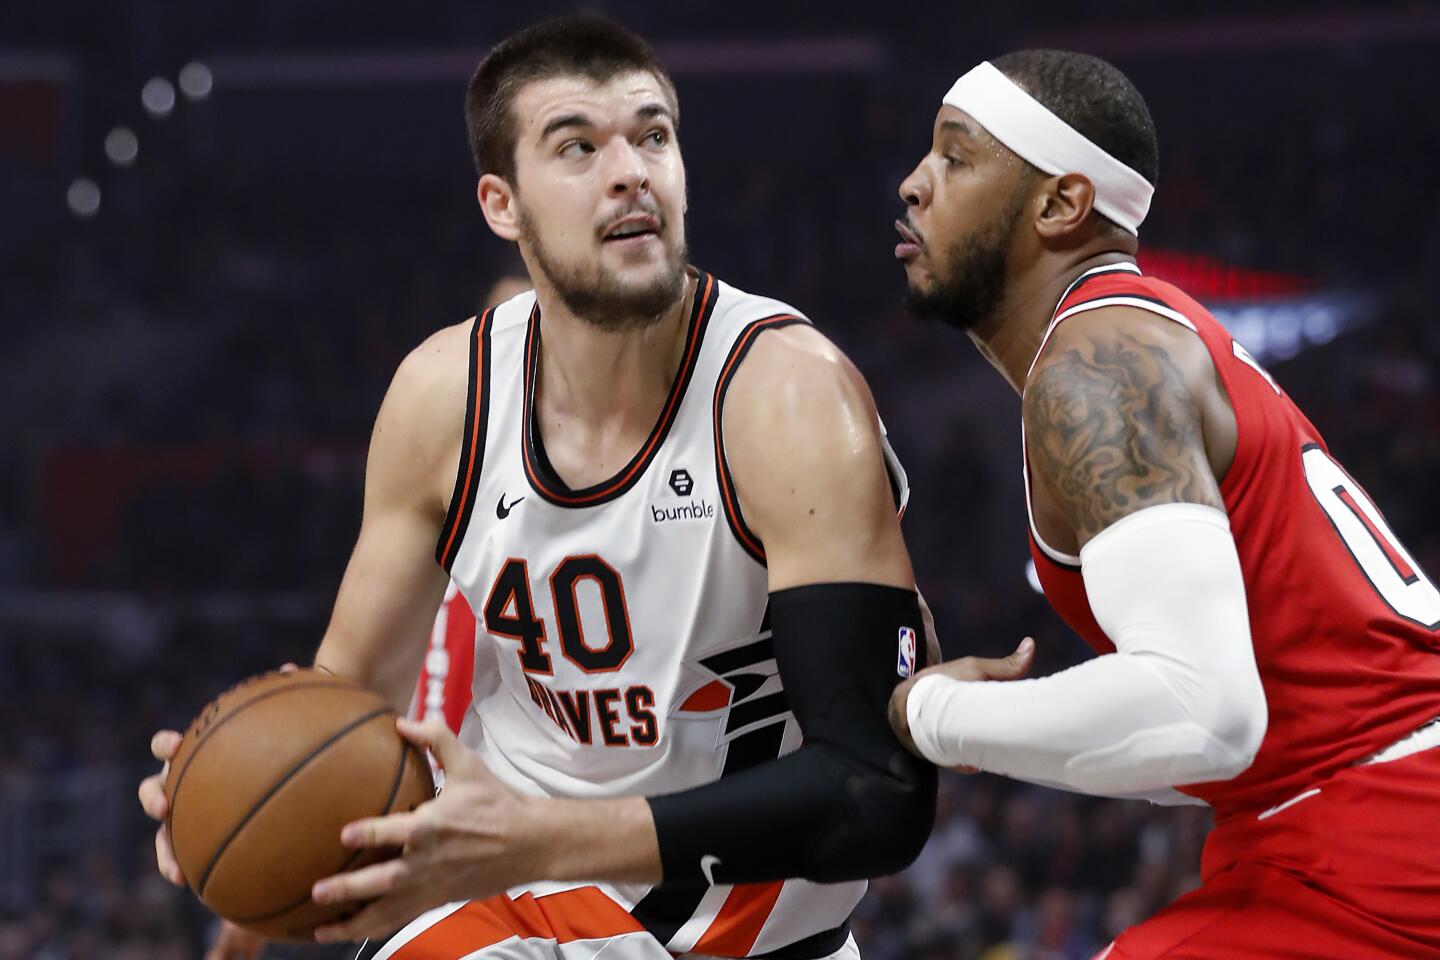 Clippers center Ivaca Zubac, left, turns to the basket against Portland Trail Blazers forward Carmelo Anthony in the first quarter at Staples Center on Tuesday.